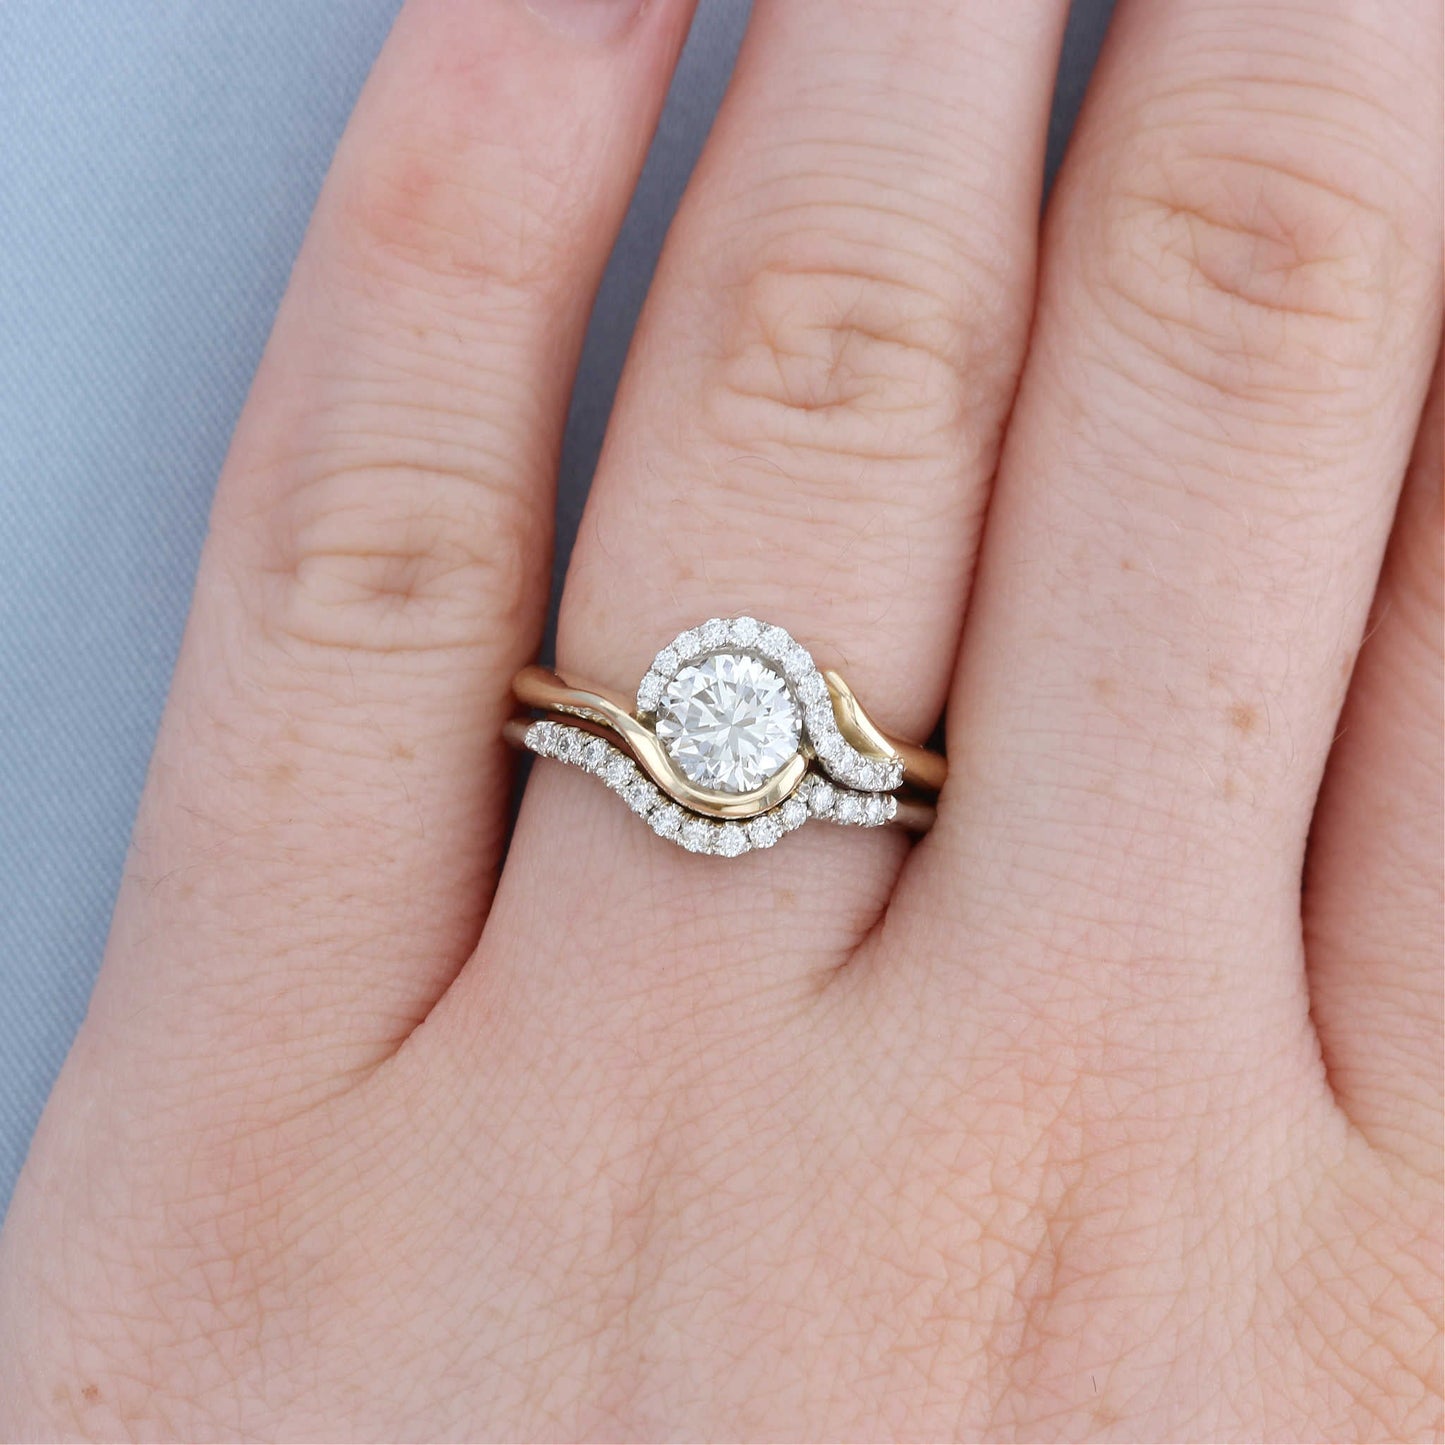 Swish Bypass Diamond Halo Engagement Ring on a Finger with Matching Shadow Band